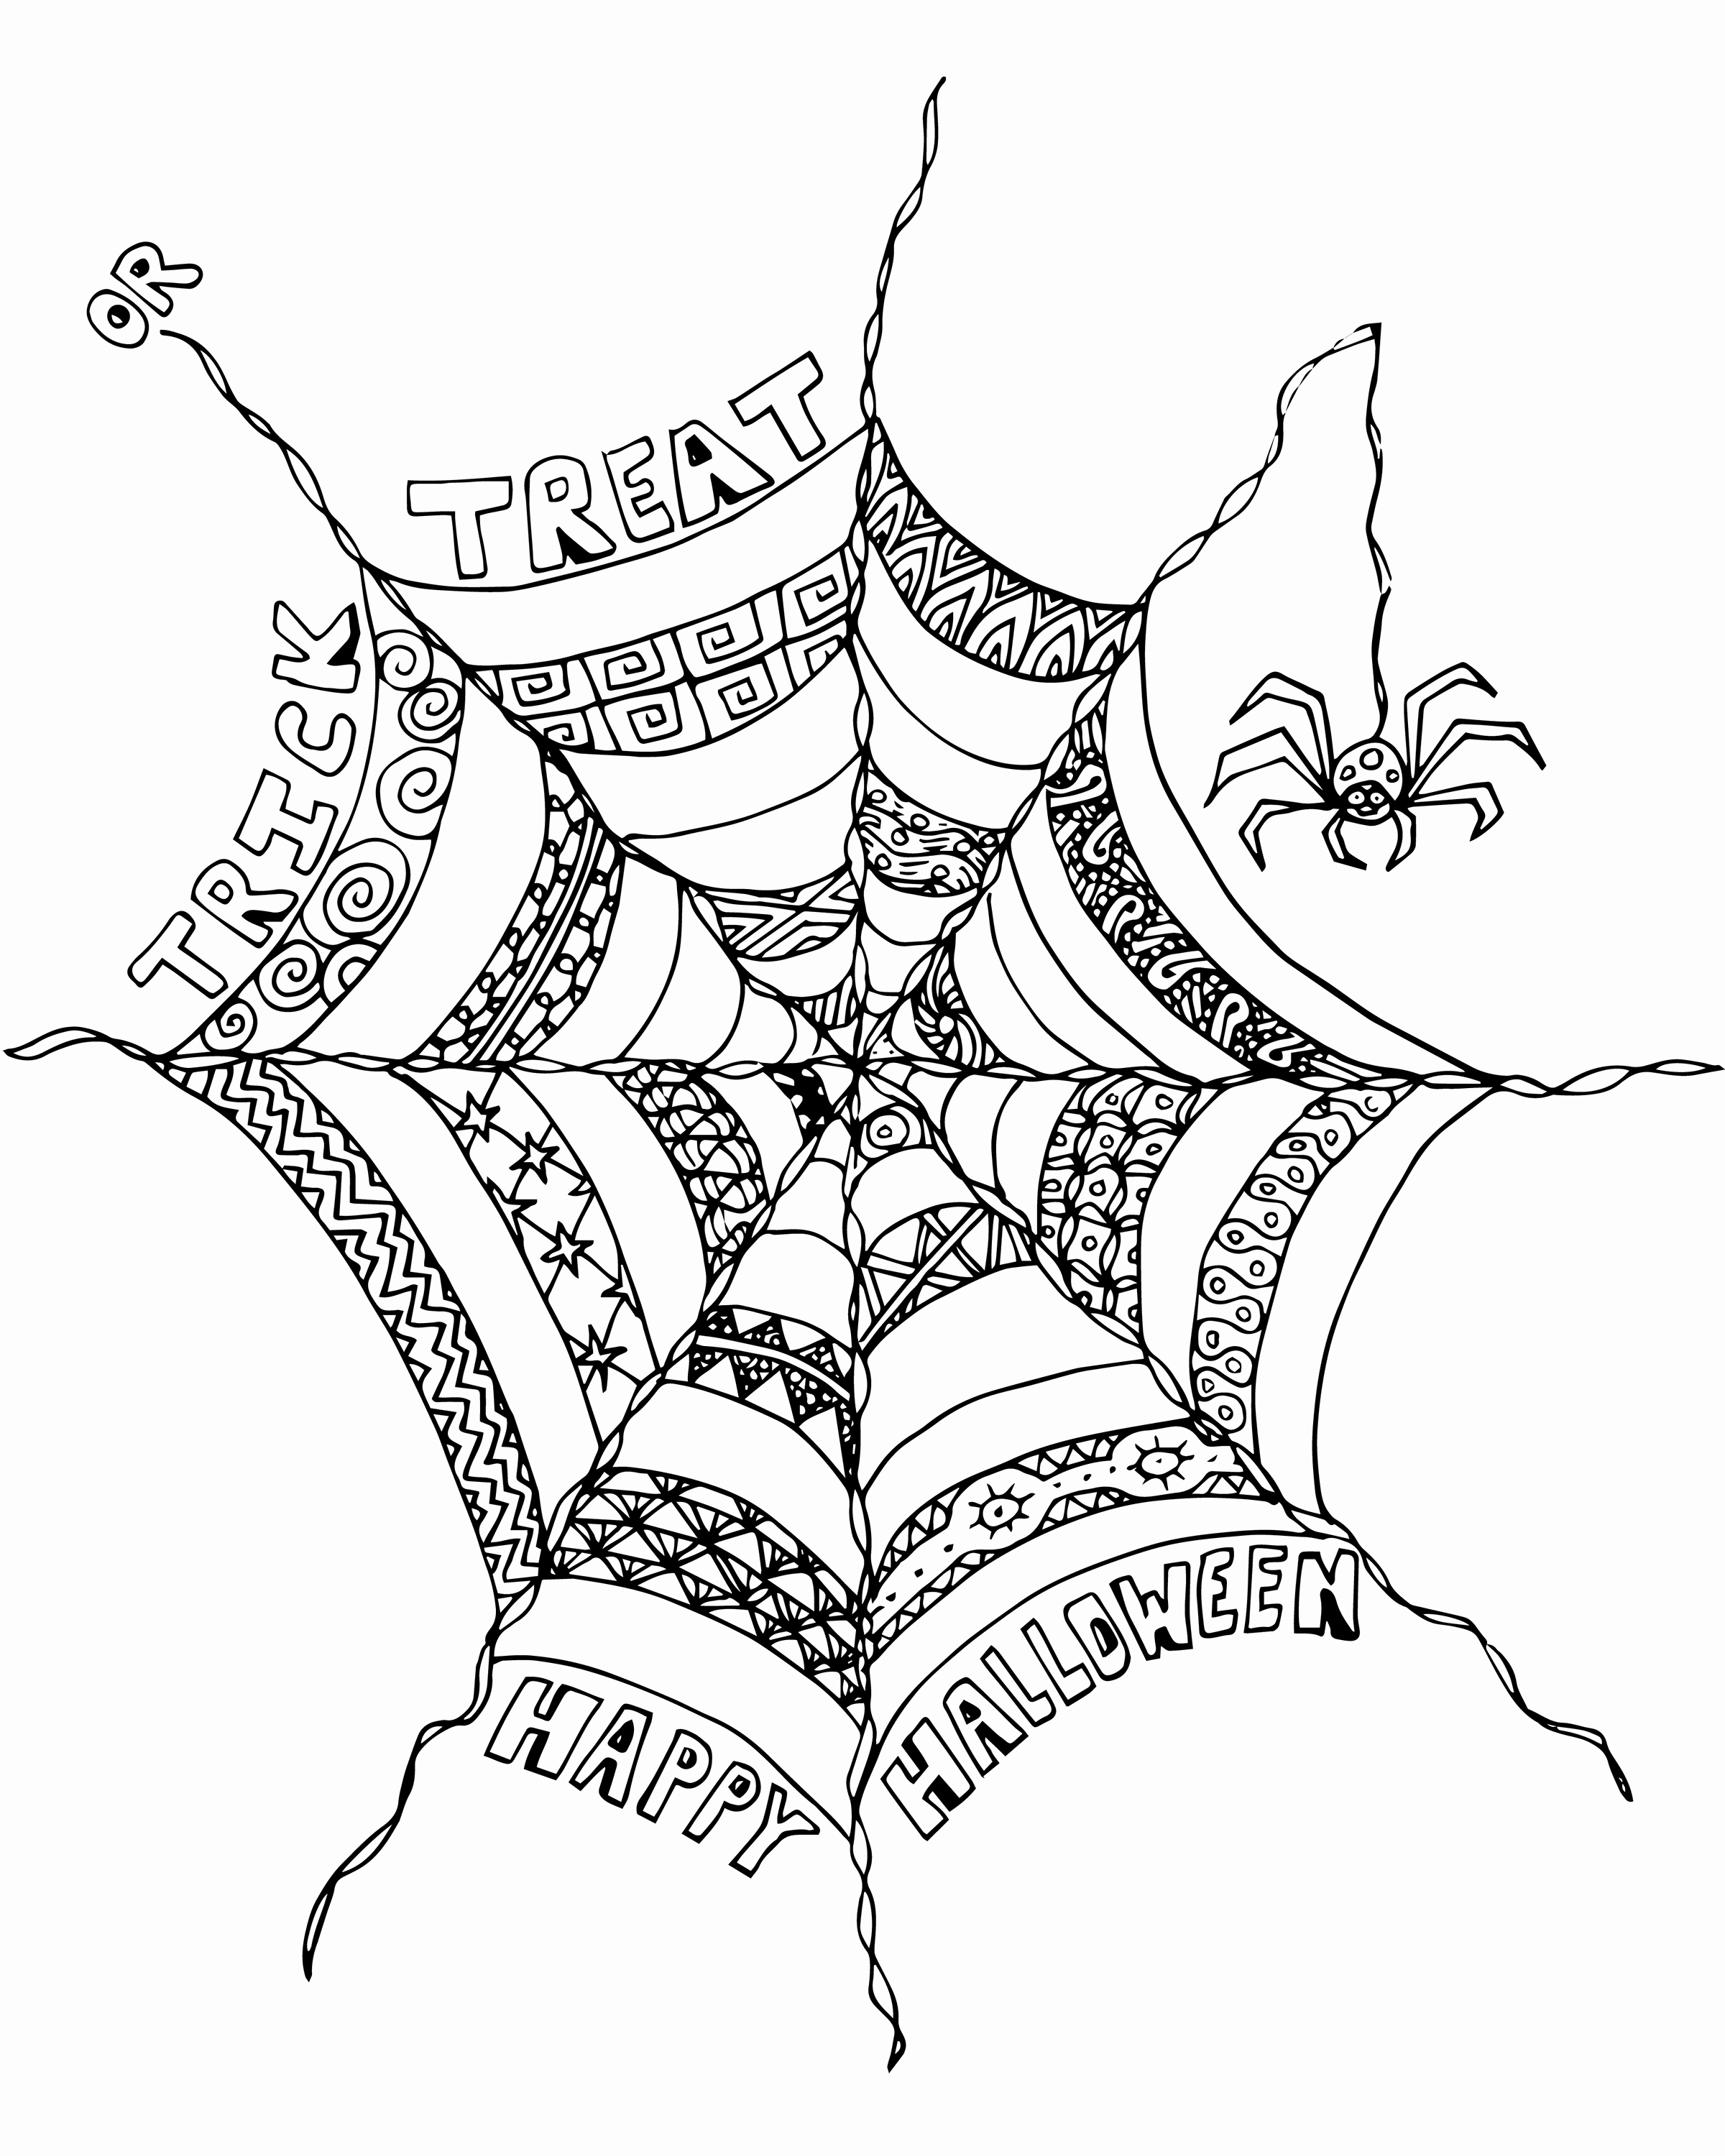 Printable Spooky Coloring Pages